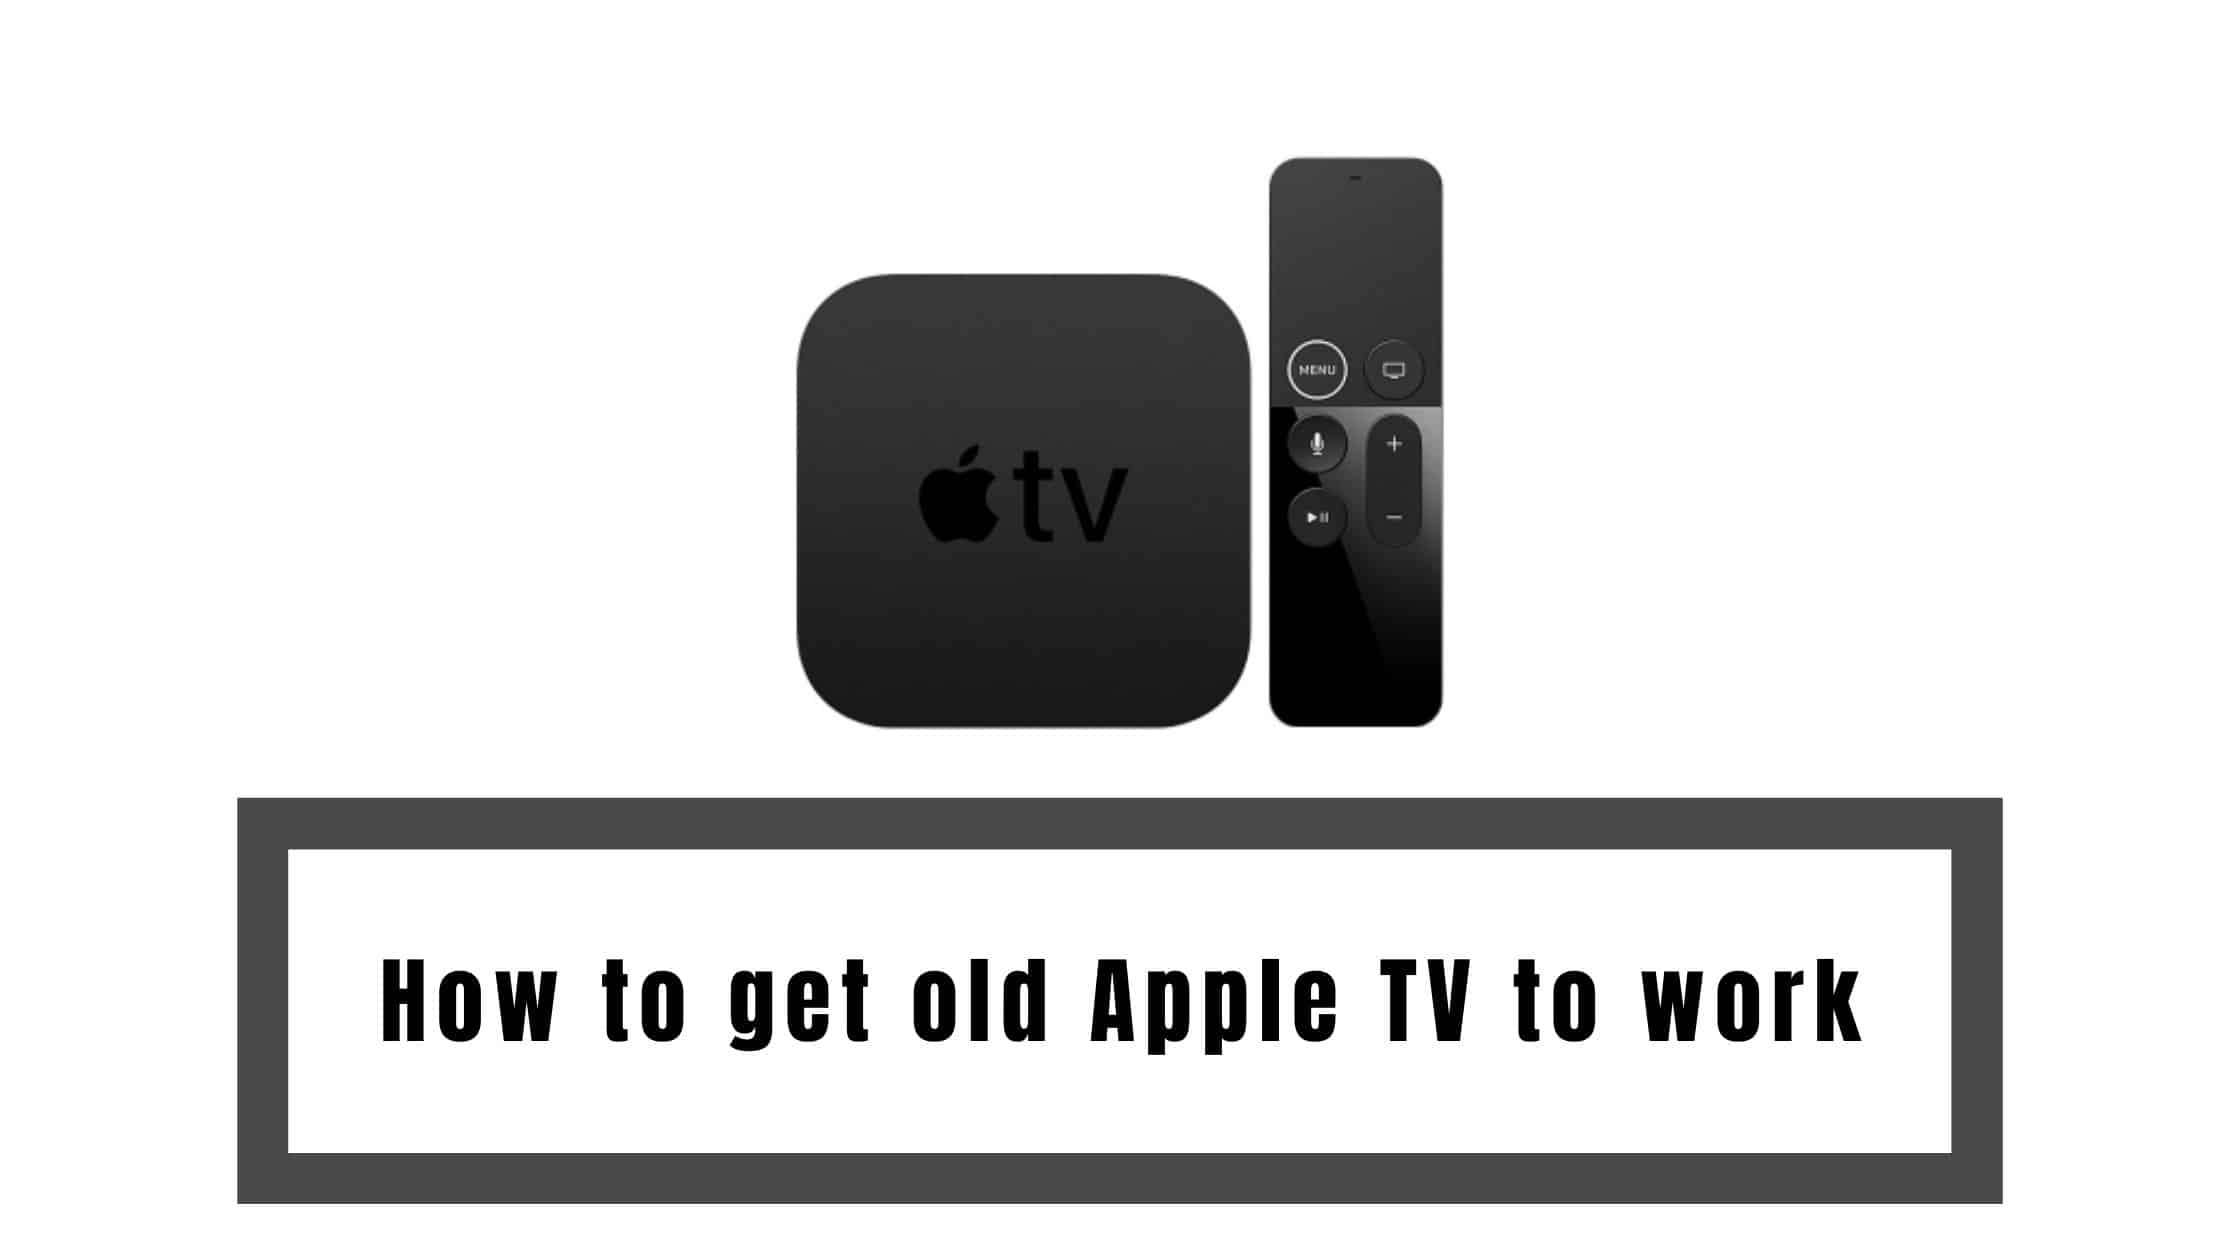 How to old Apple TV to work | The Latest - Stupid Apple Rumors